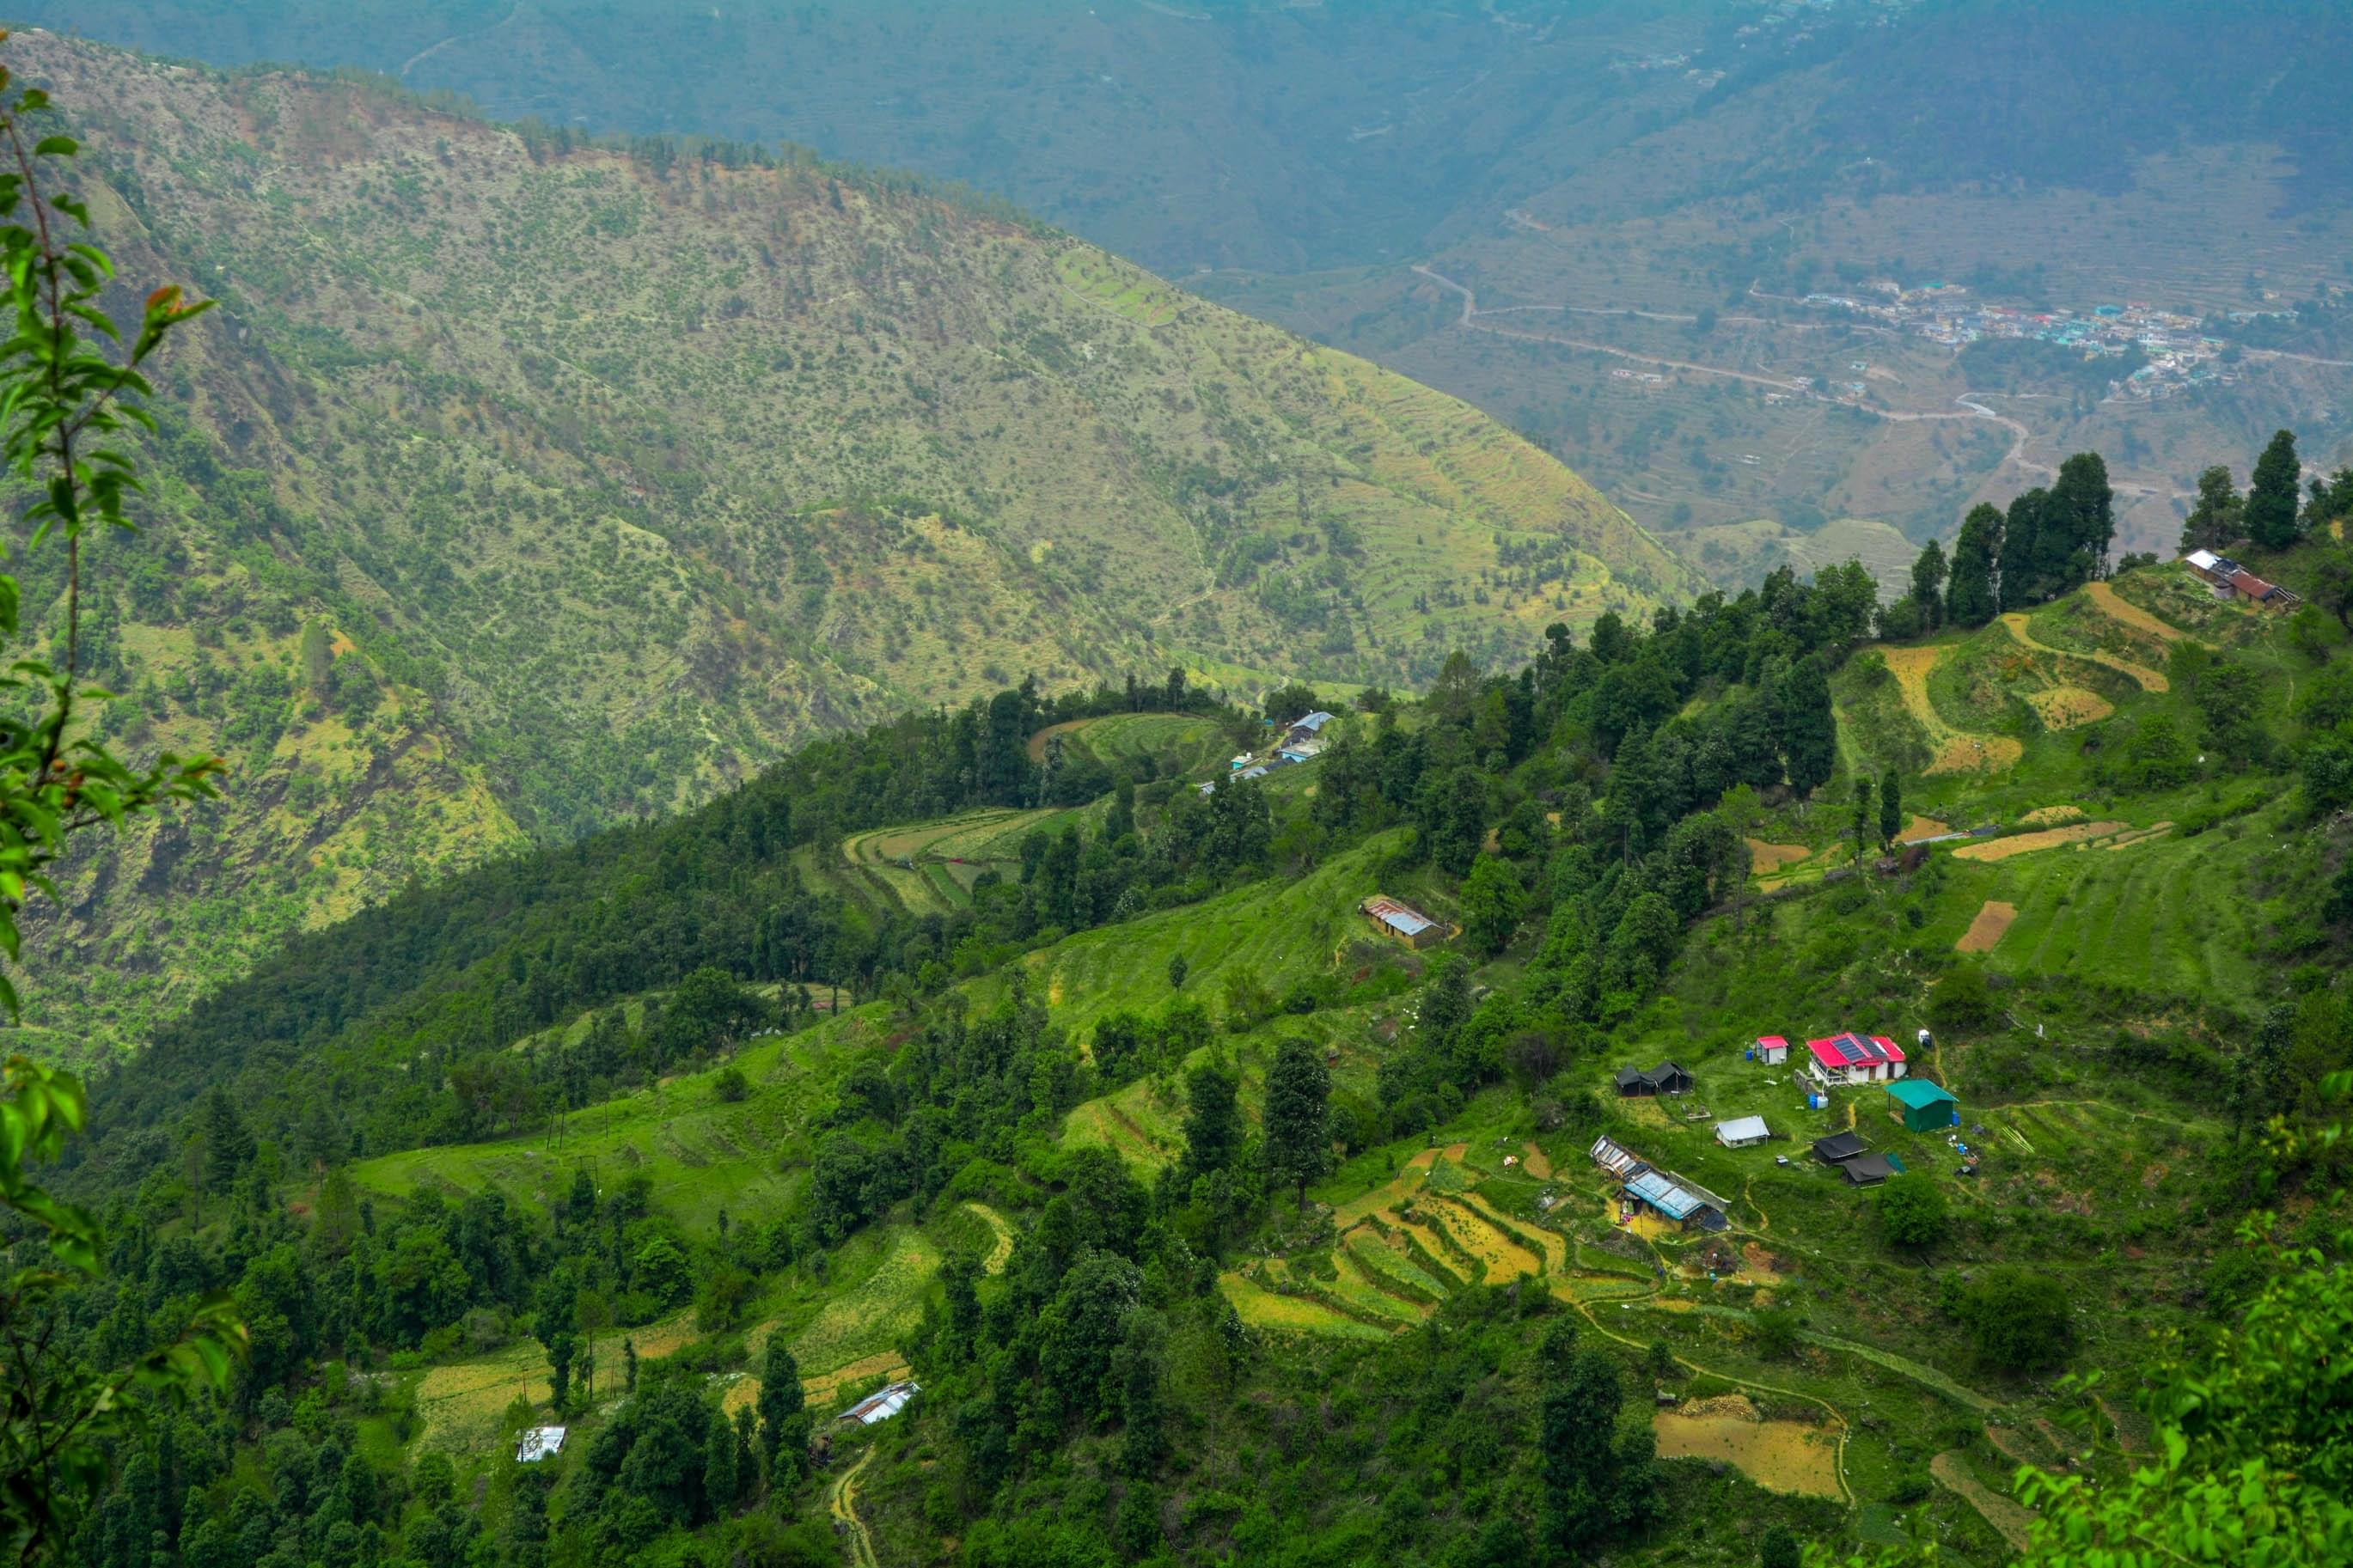 Witness the beautiful landscape of Dhanaulti